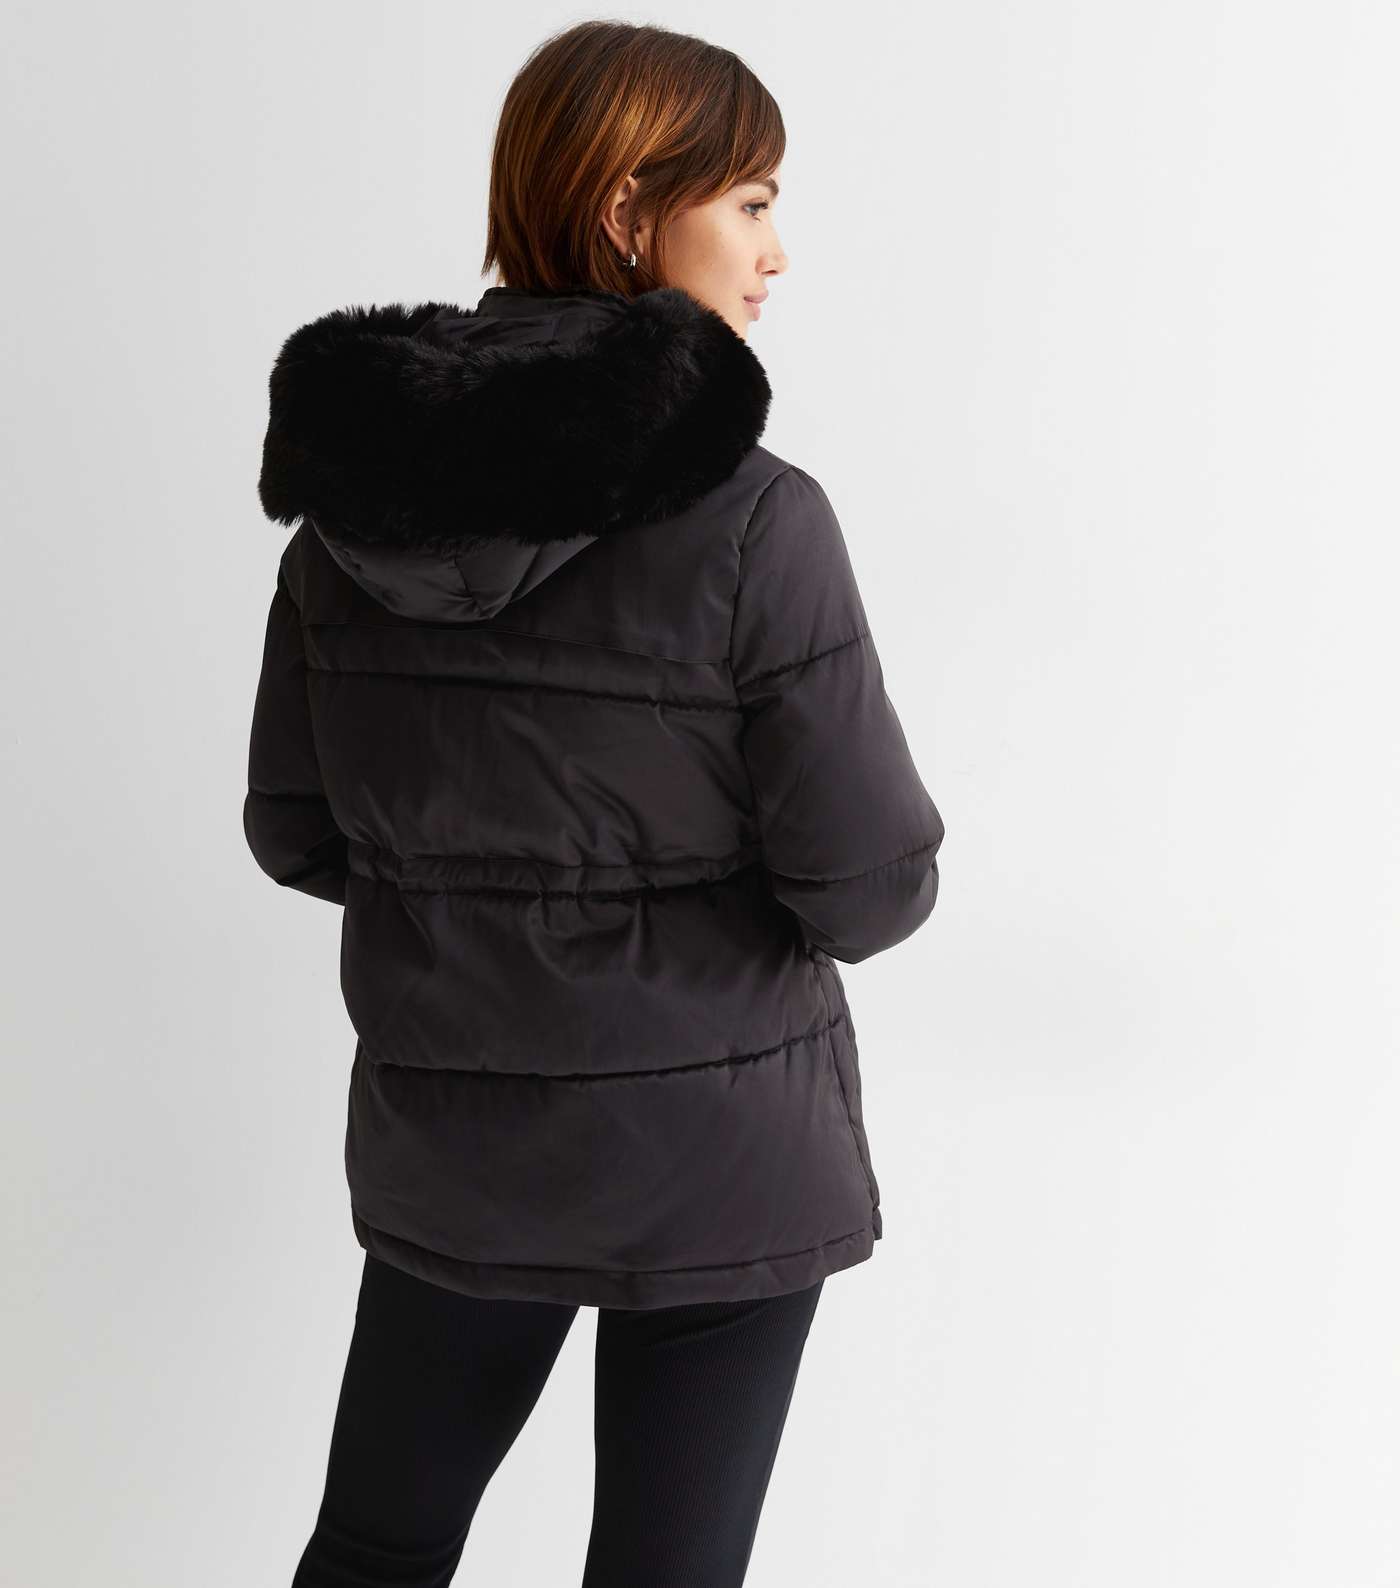 Cameo Rose Black Toggle Faux Fur Hooded Puffer Jacket Image 4